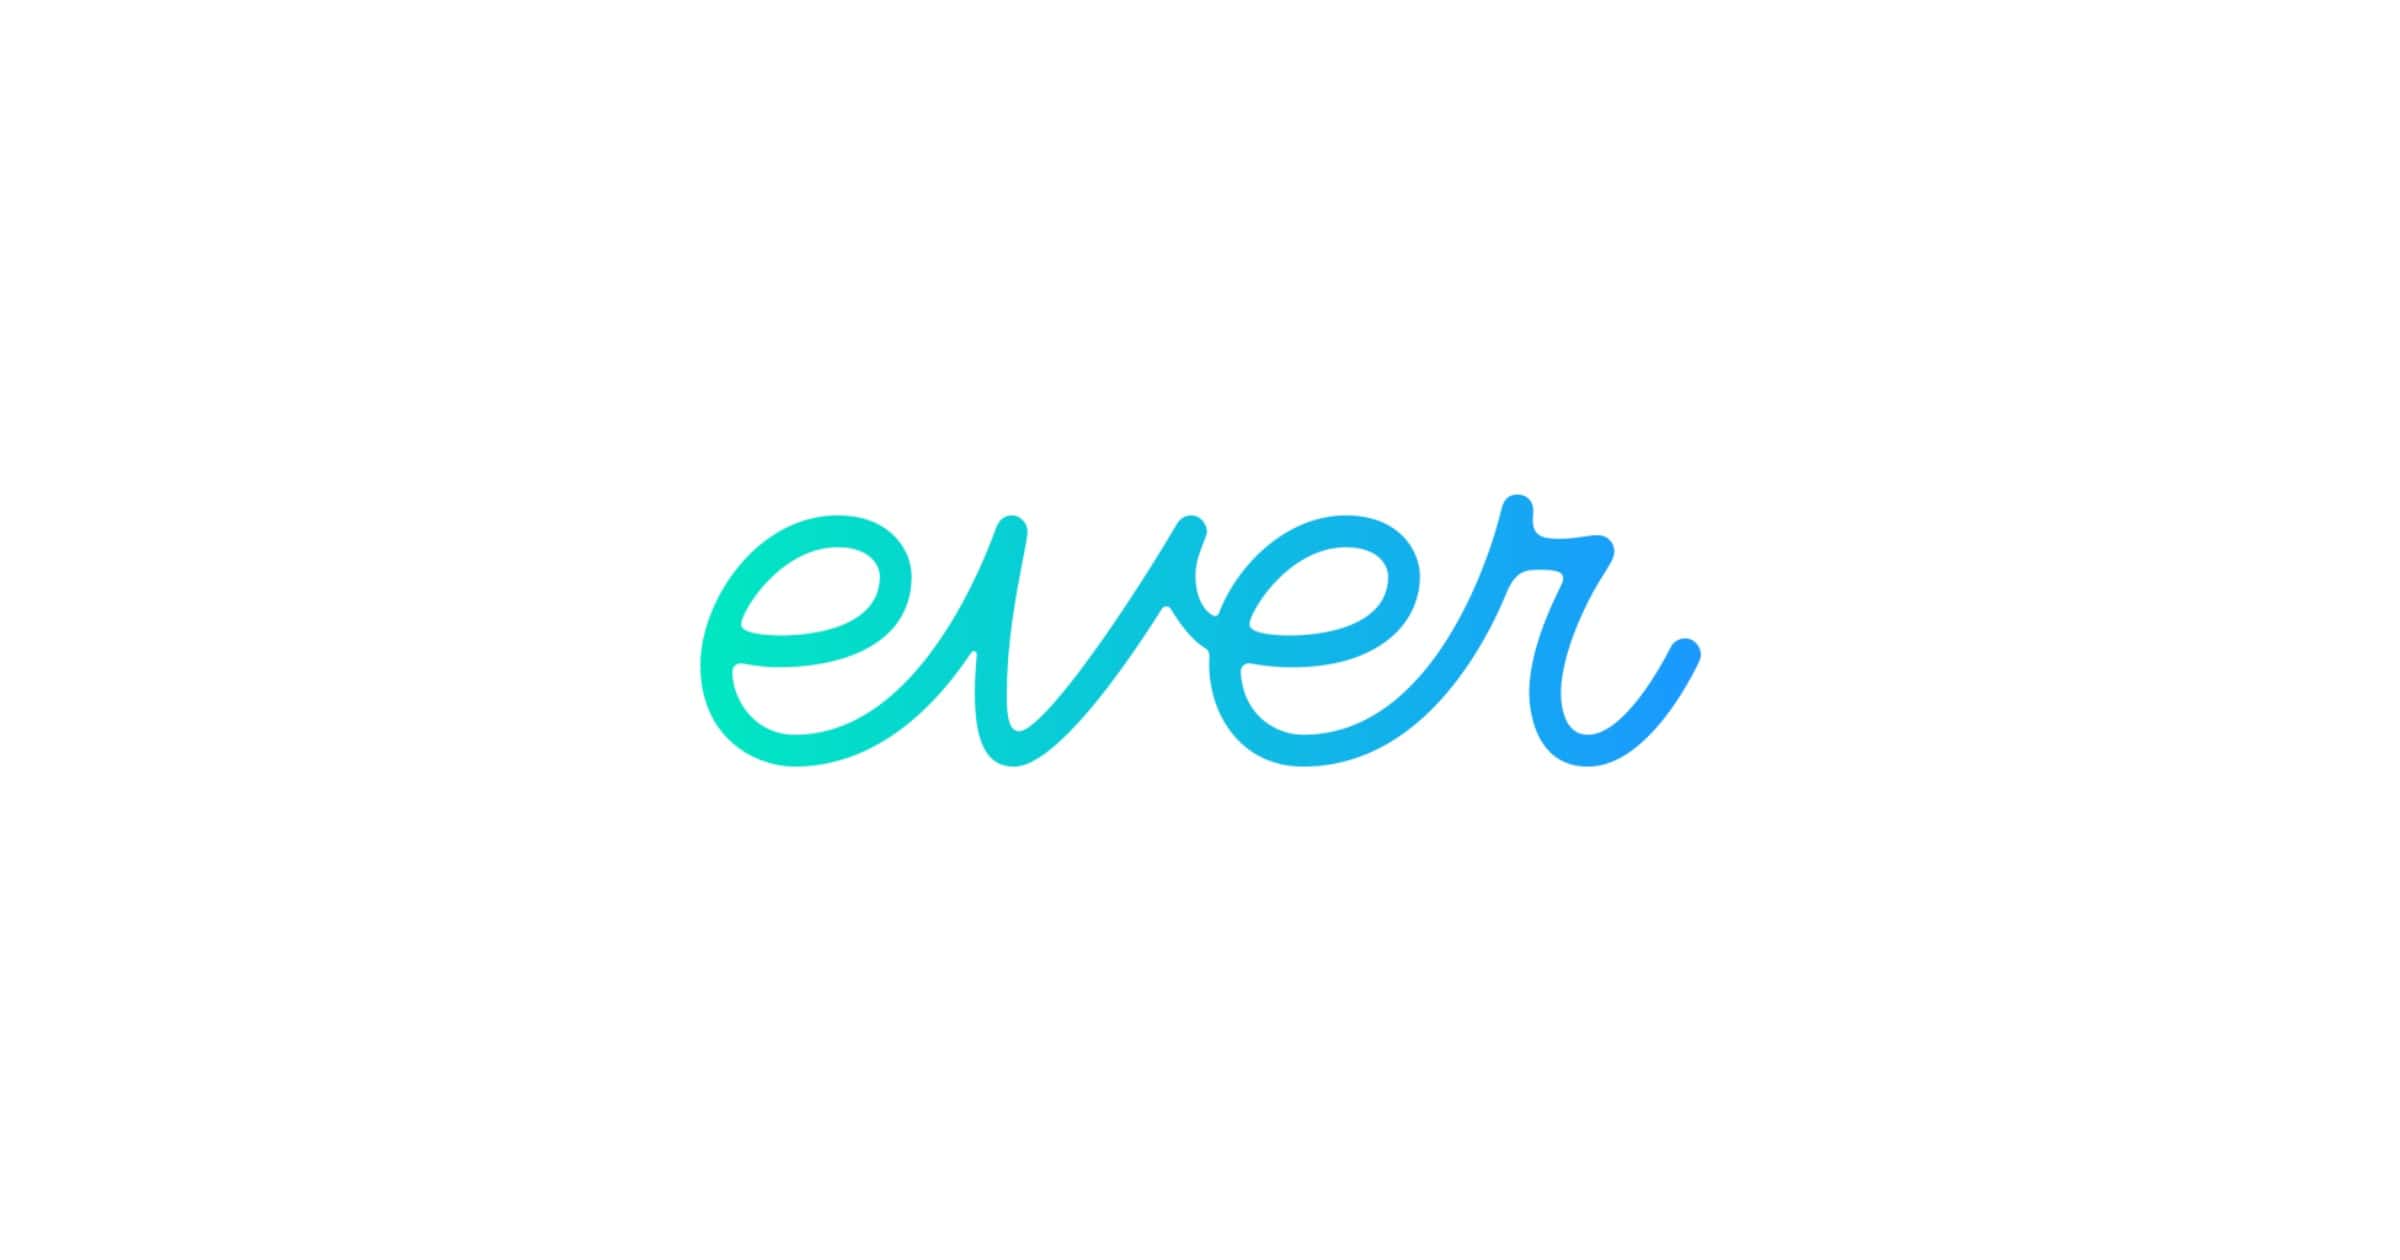 Photo Service ‘Ever’ Shuts Down August 31